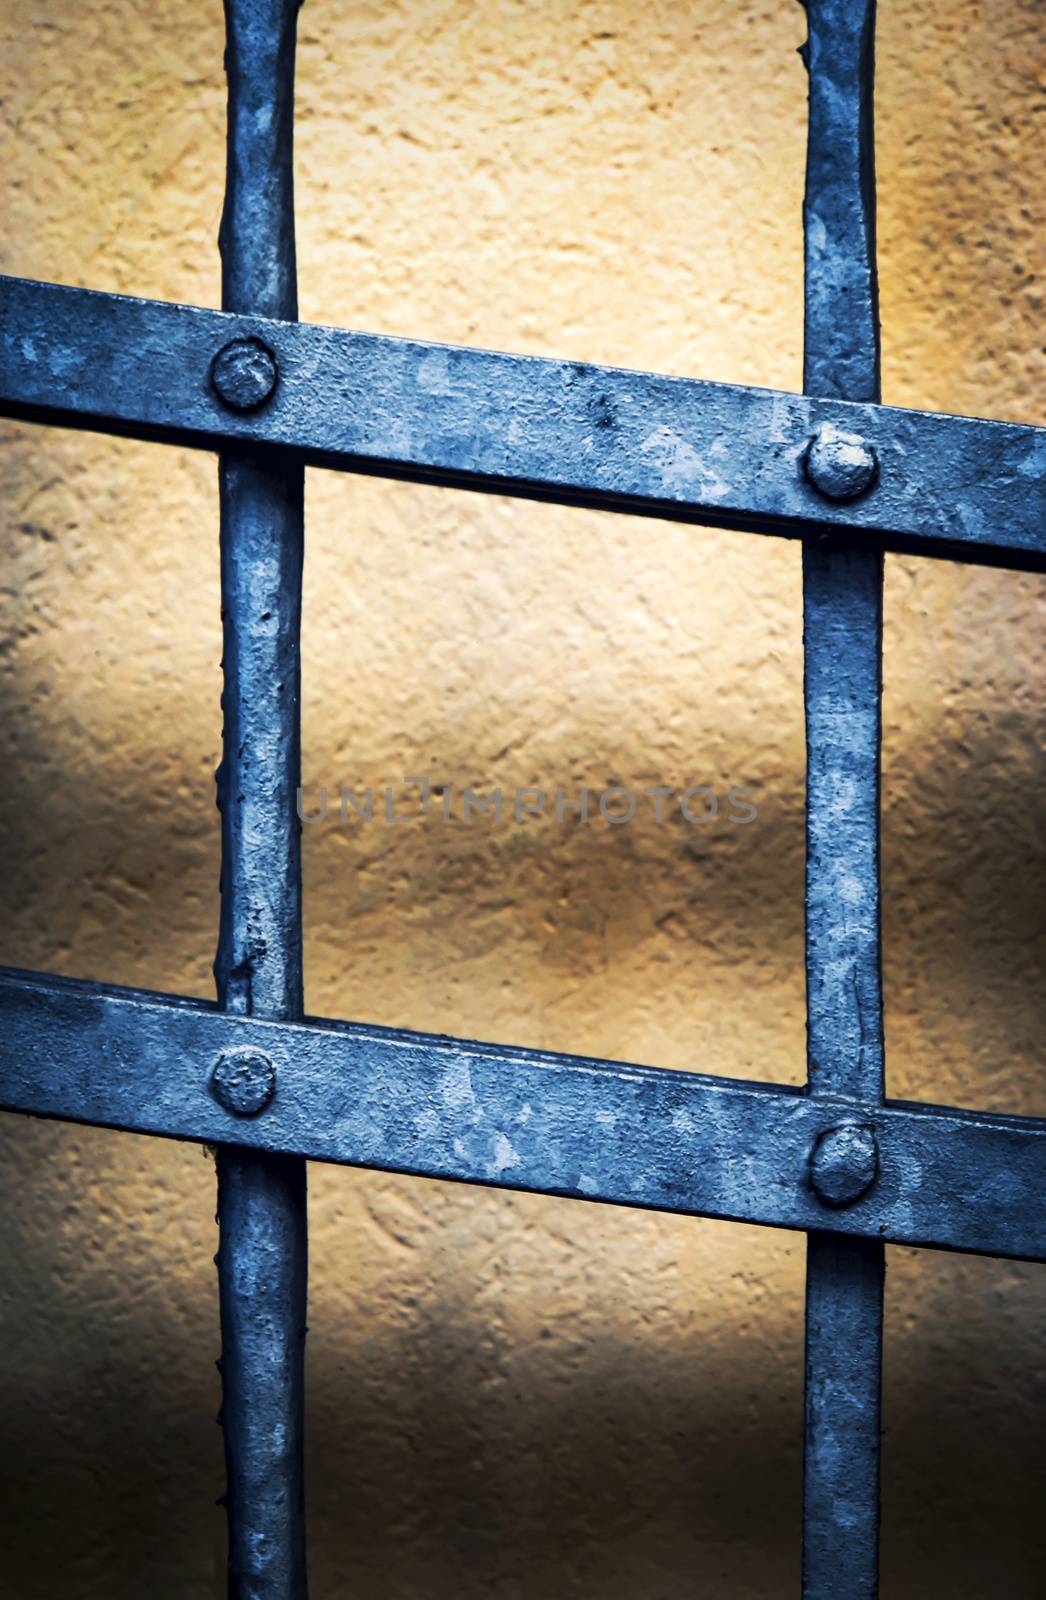 abstract background black forged iron grating with rivets